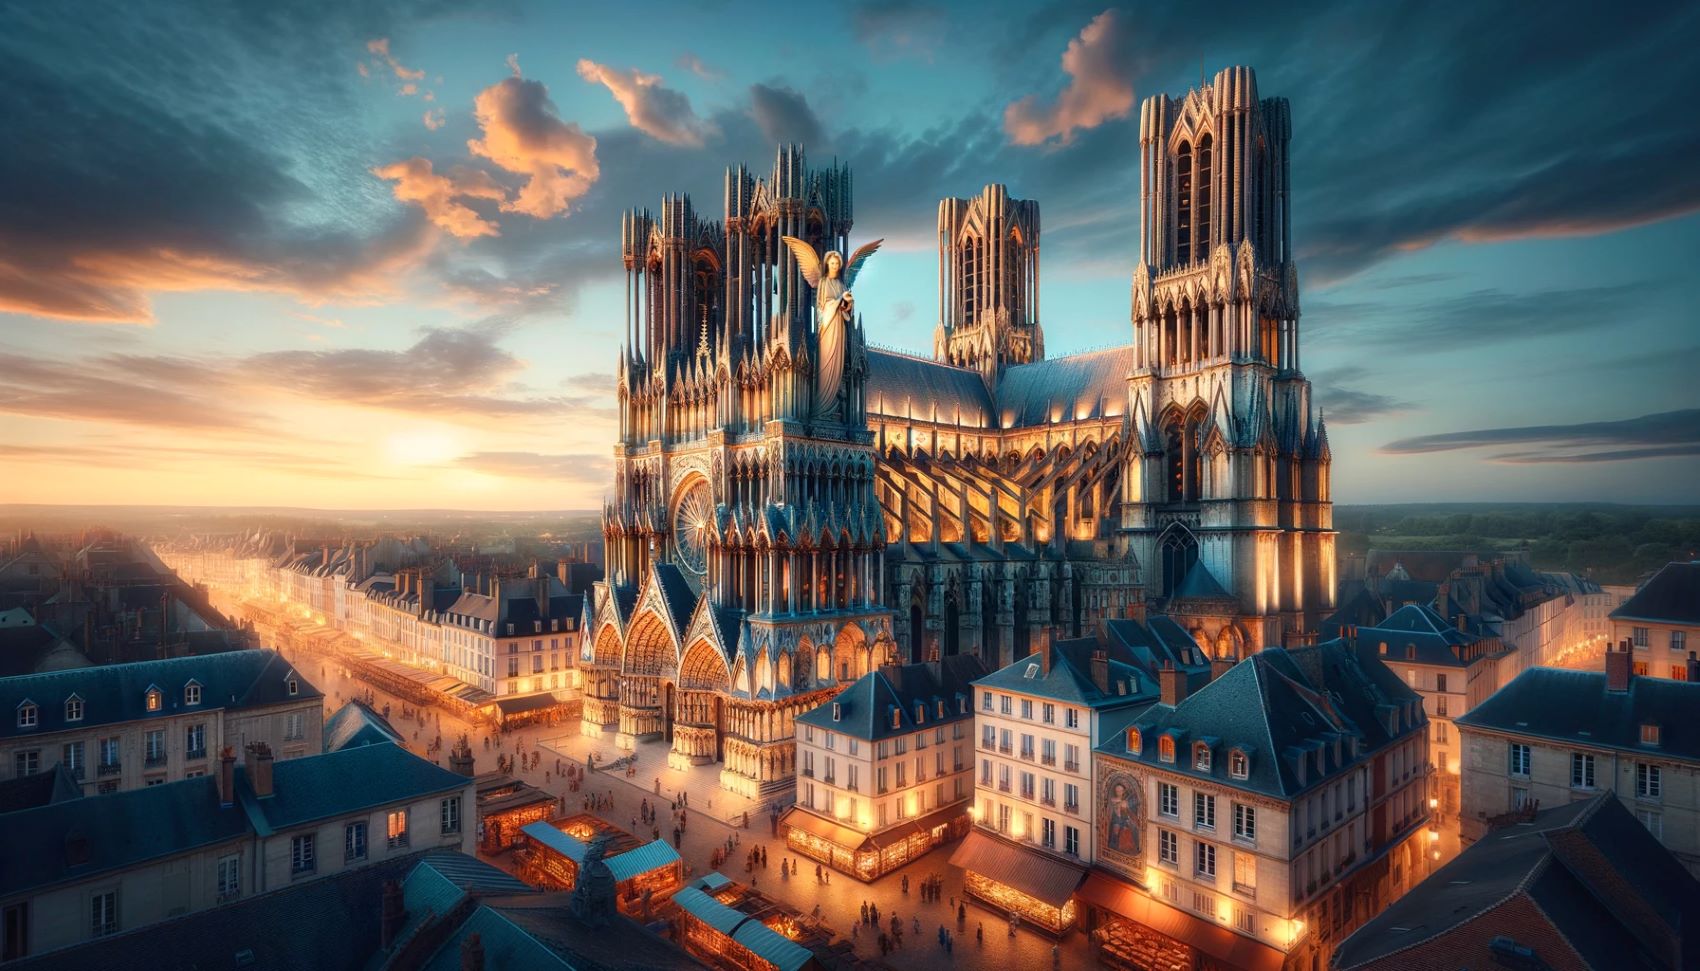 Who Designed The Reims Cathedral?